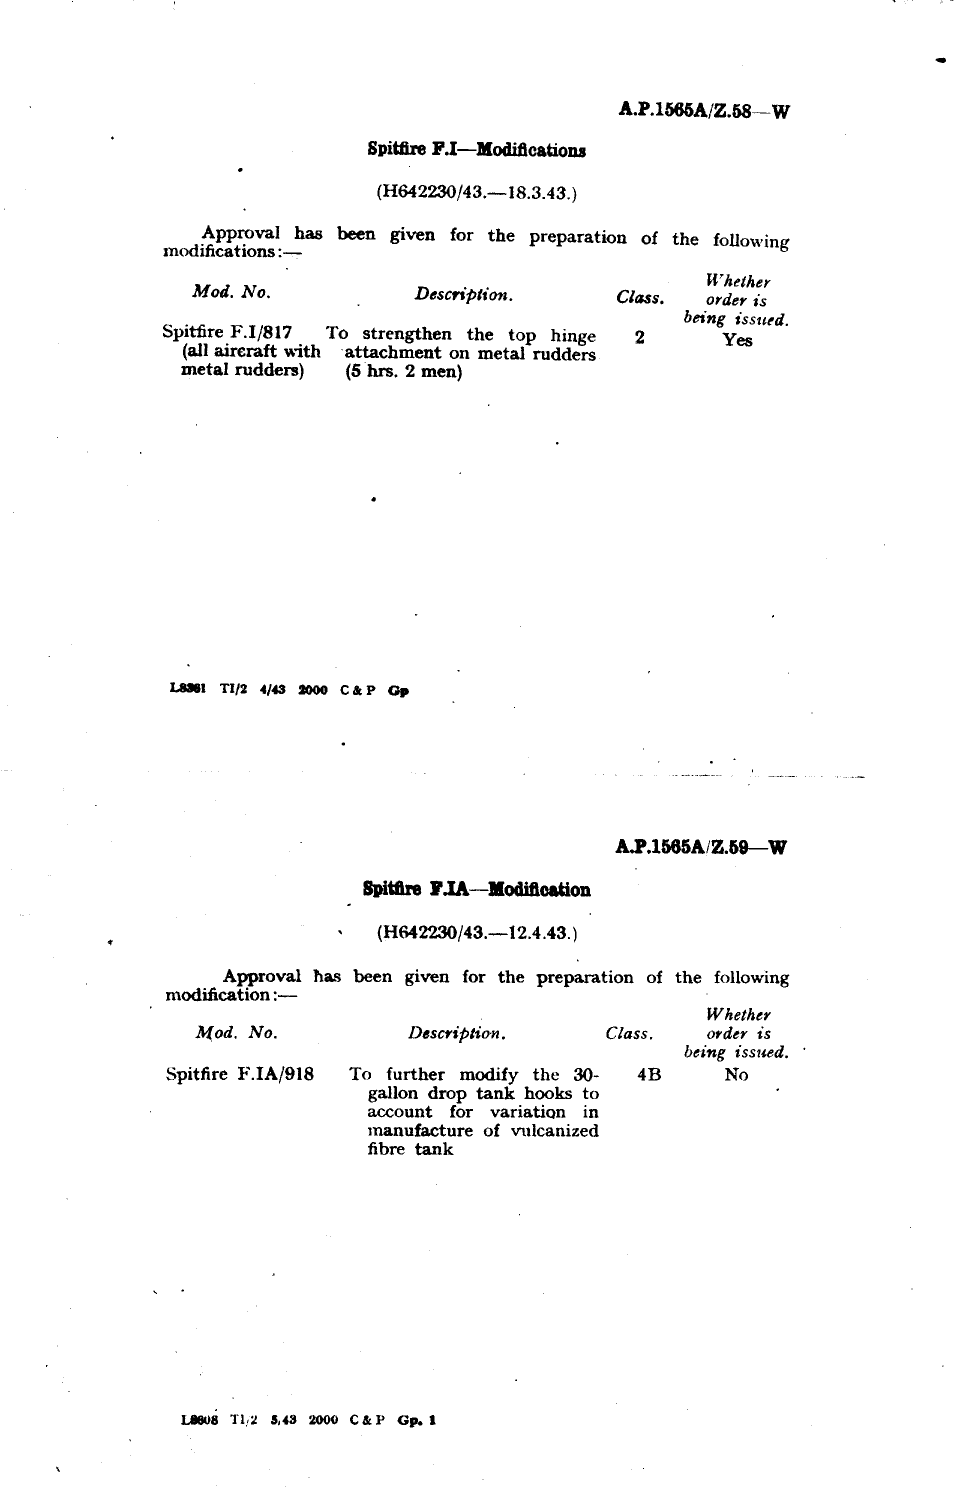 Sample page 1 from AirCorps Library document: Spitfire F.IA Modification 918